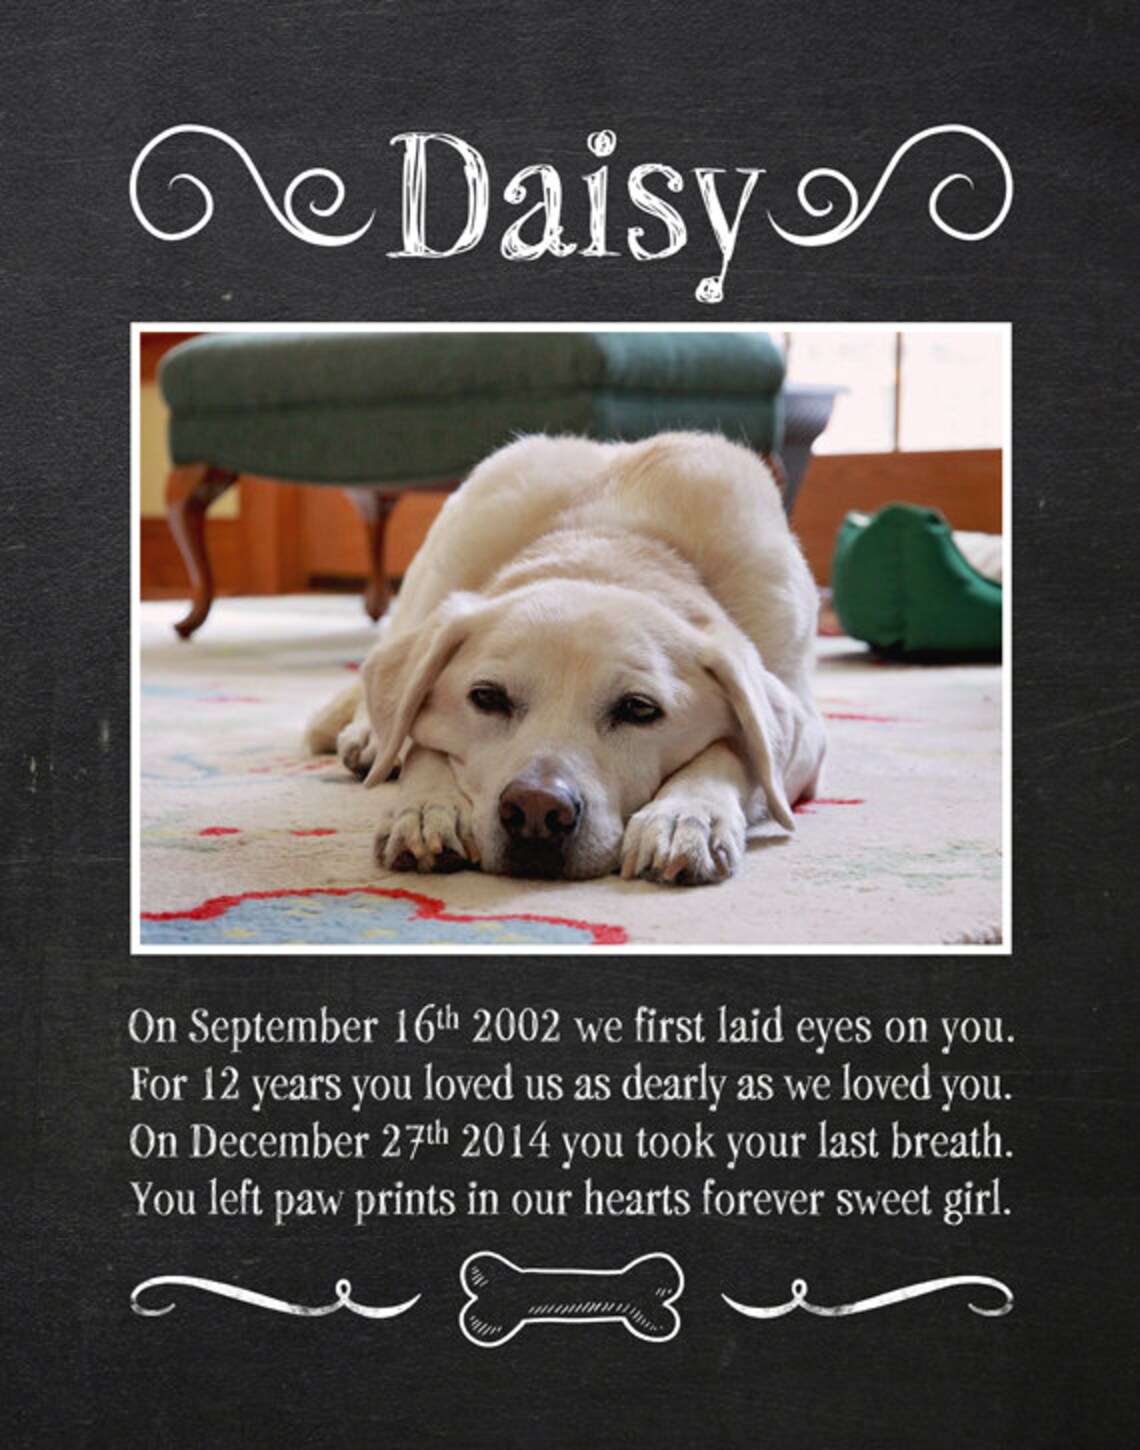 Pet loss gift pet memorial gift personalized dog lover